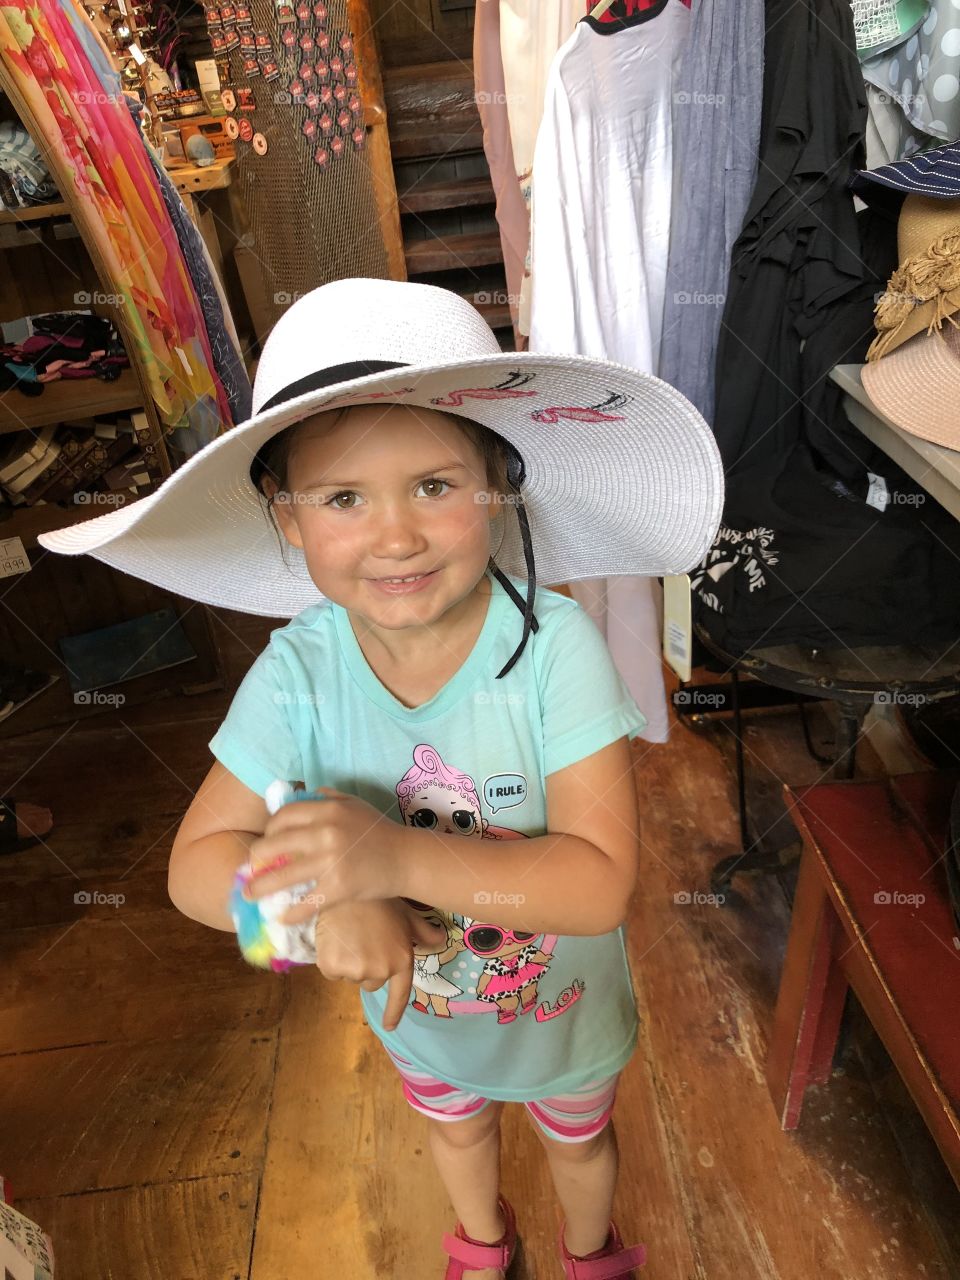 “Look at Me! Can you buy this hat for me please?”